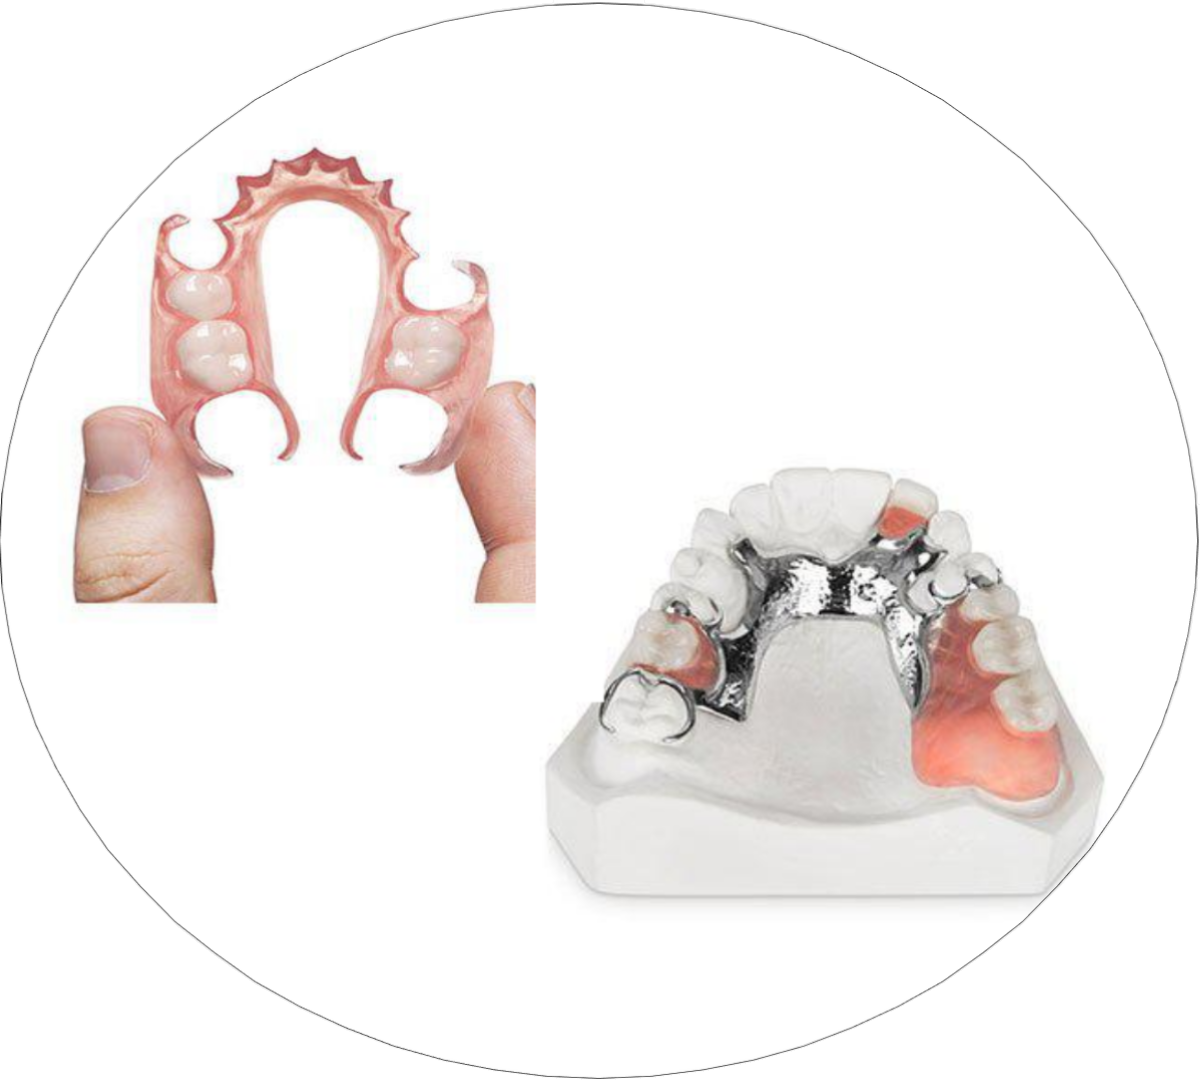 Partial removable prosthesis